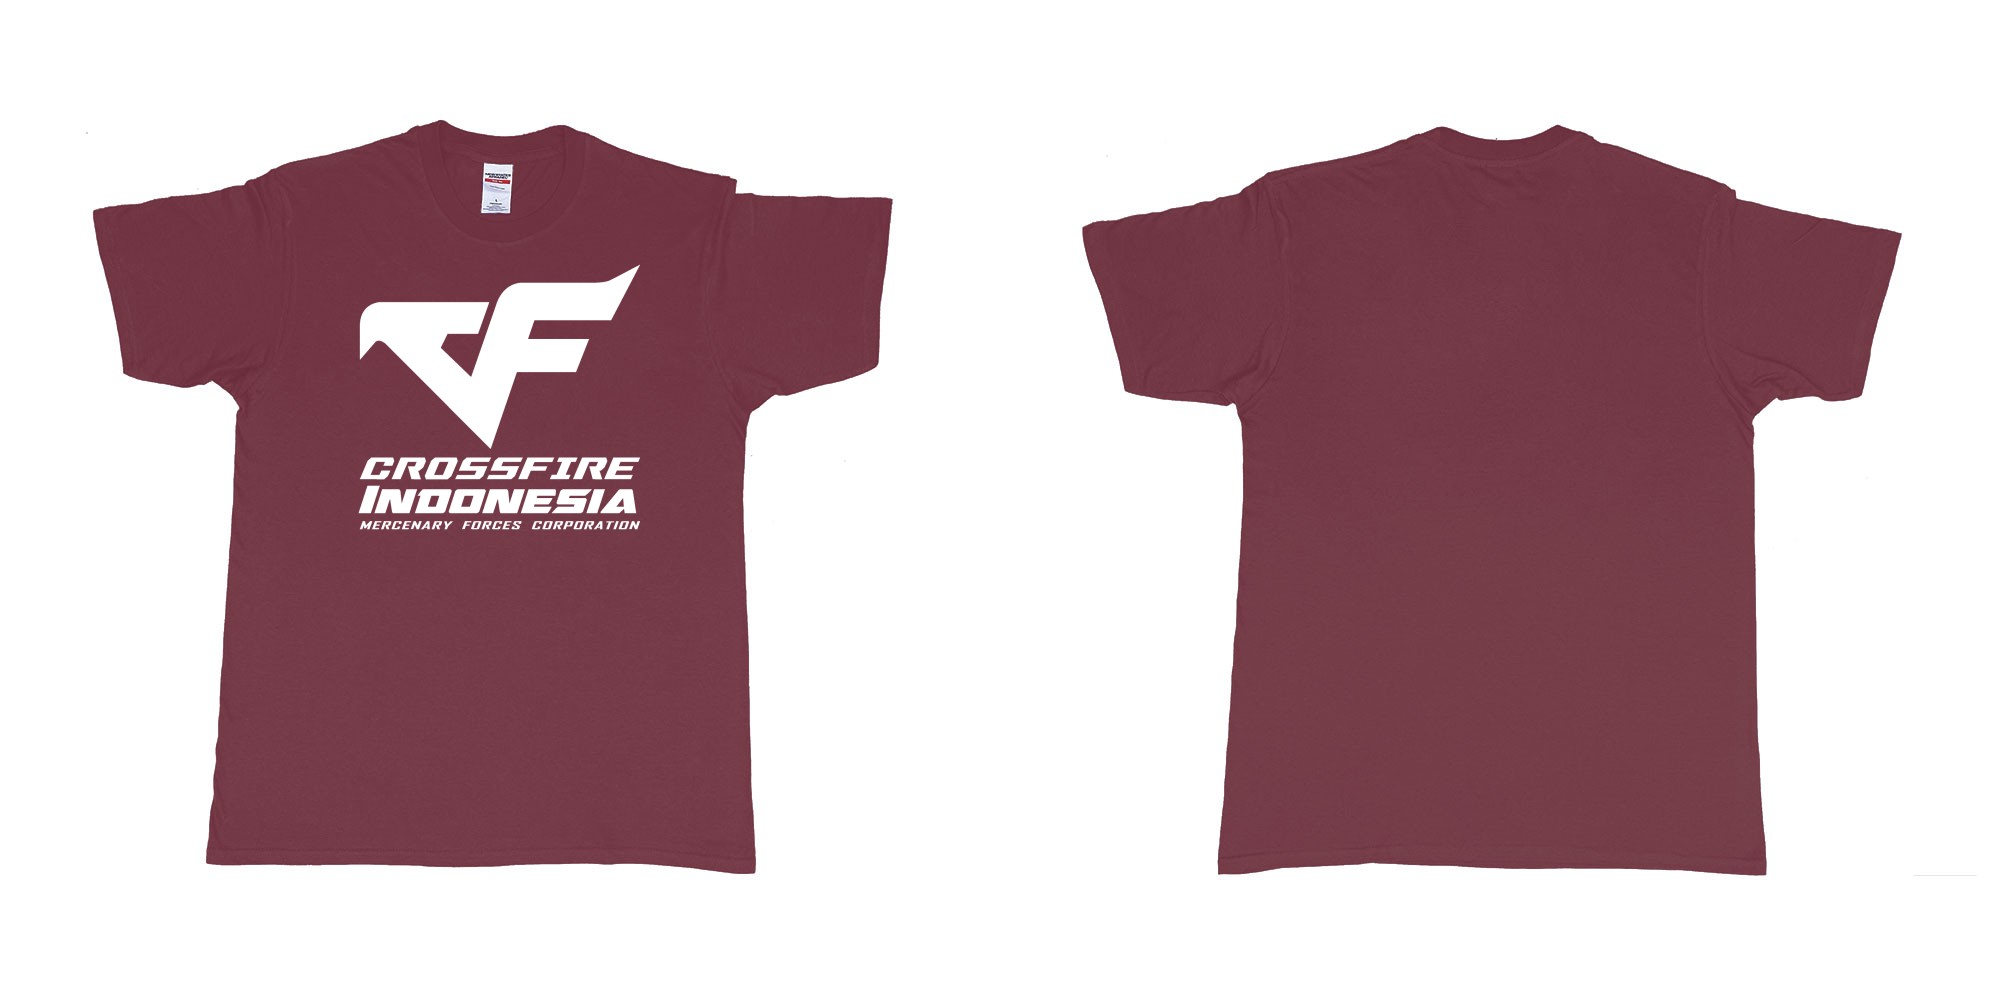 Custom tshirt design crossfire indonesia cfindo in fabric color marron choice your own text made in Bali by The Pirate Way